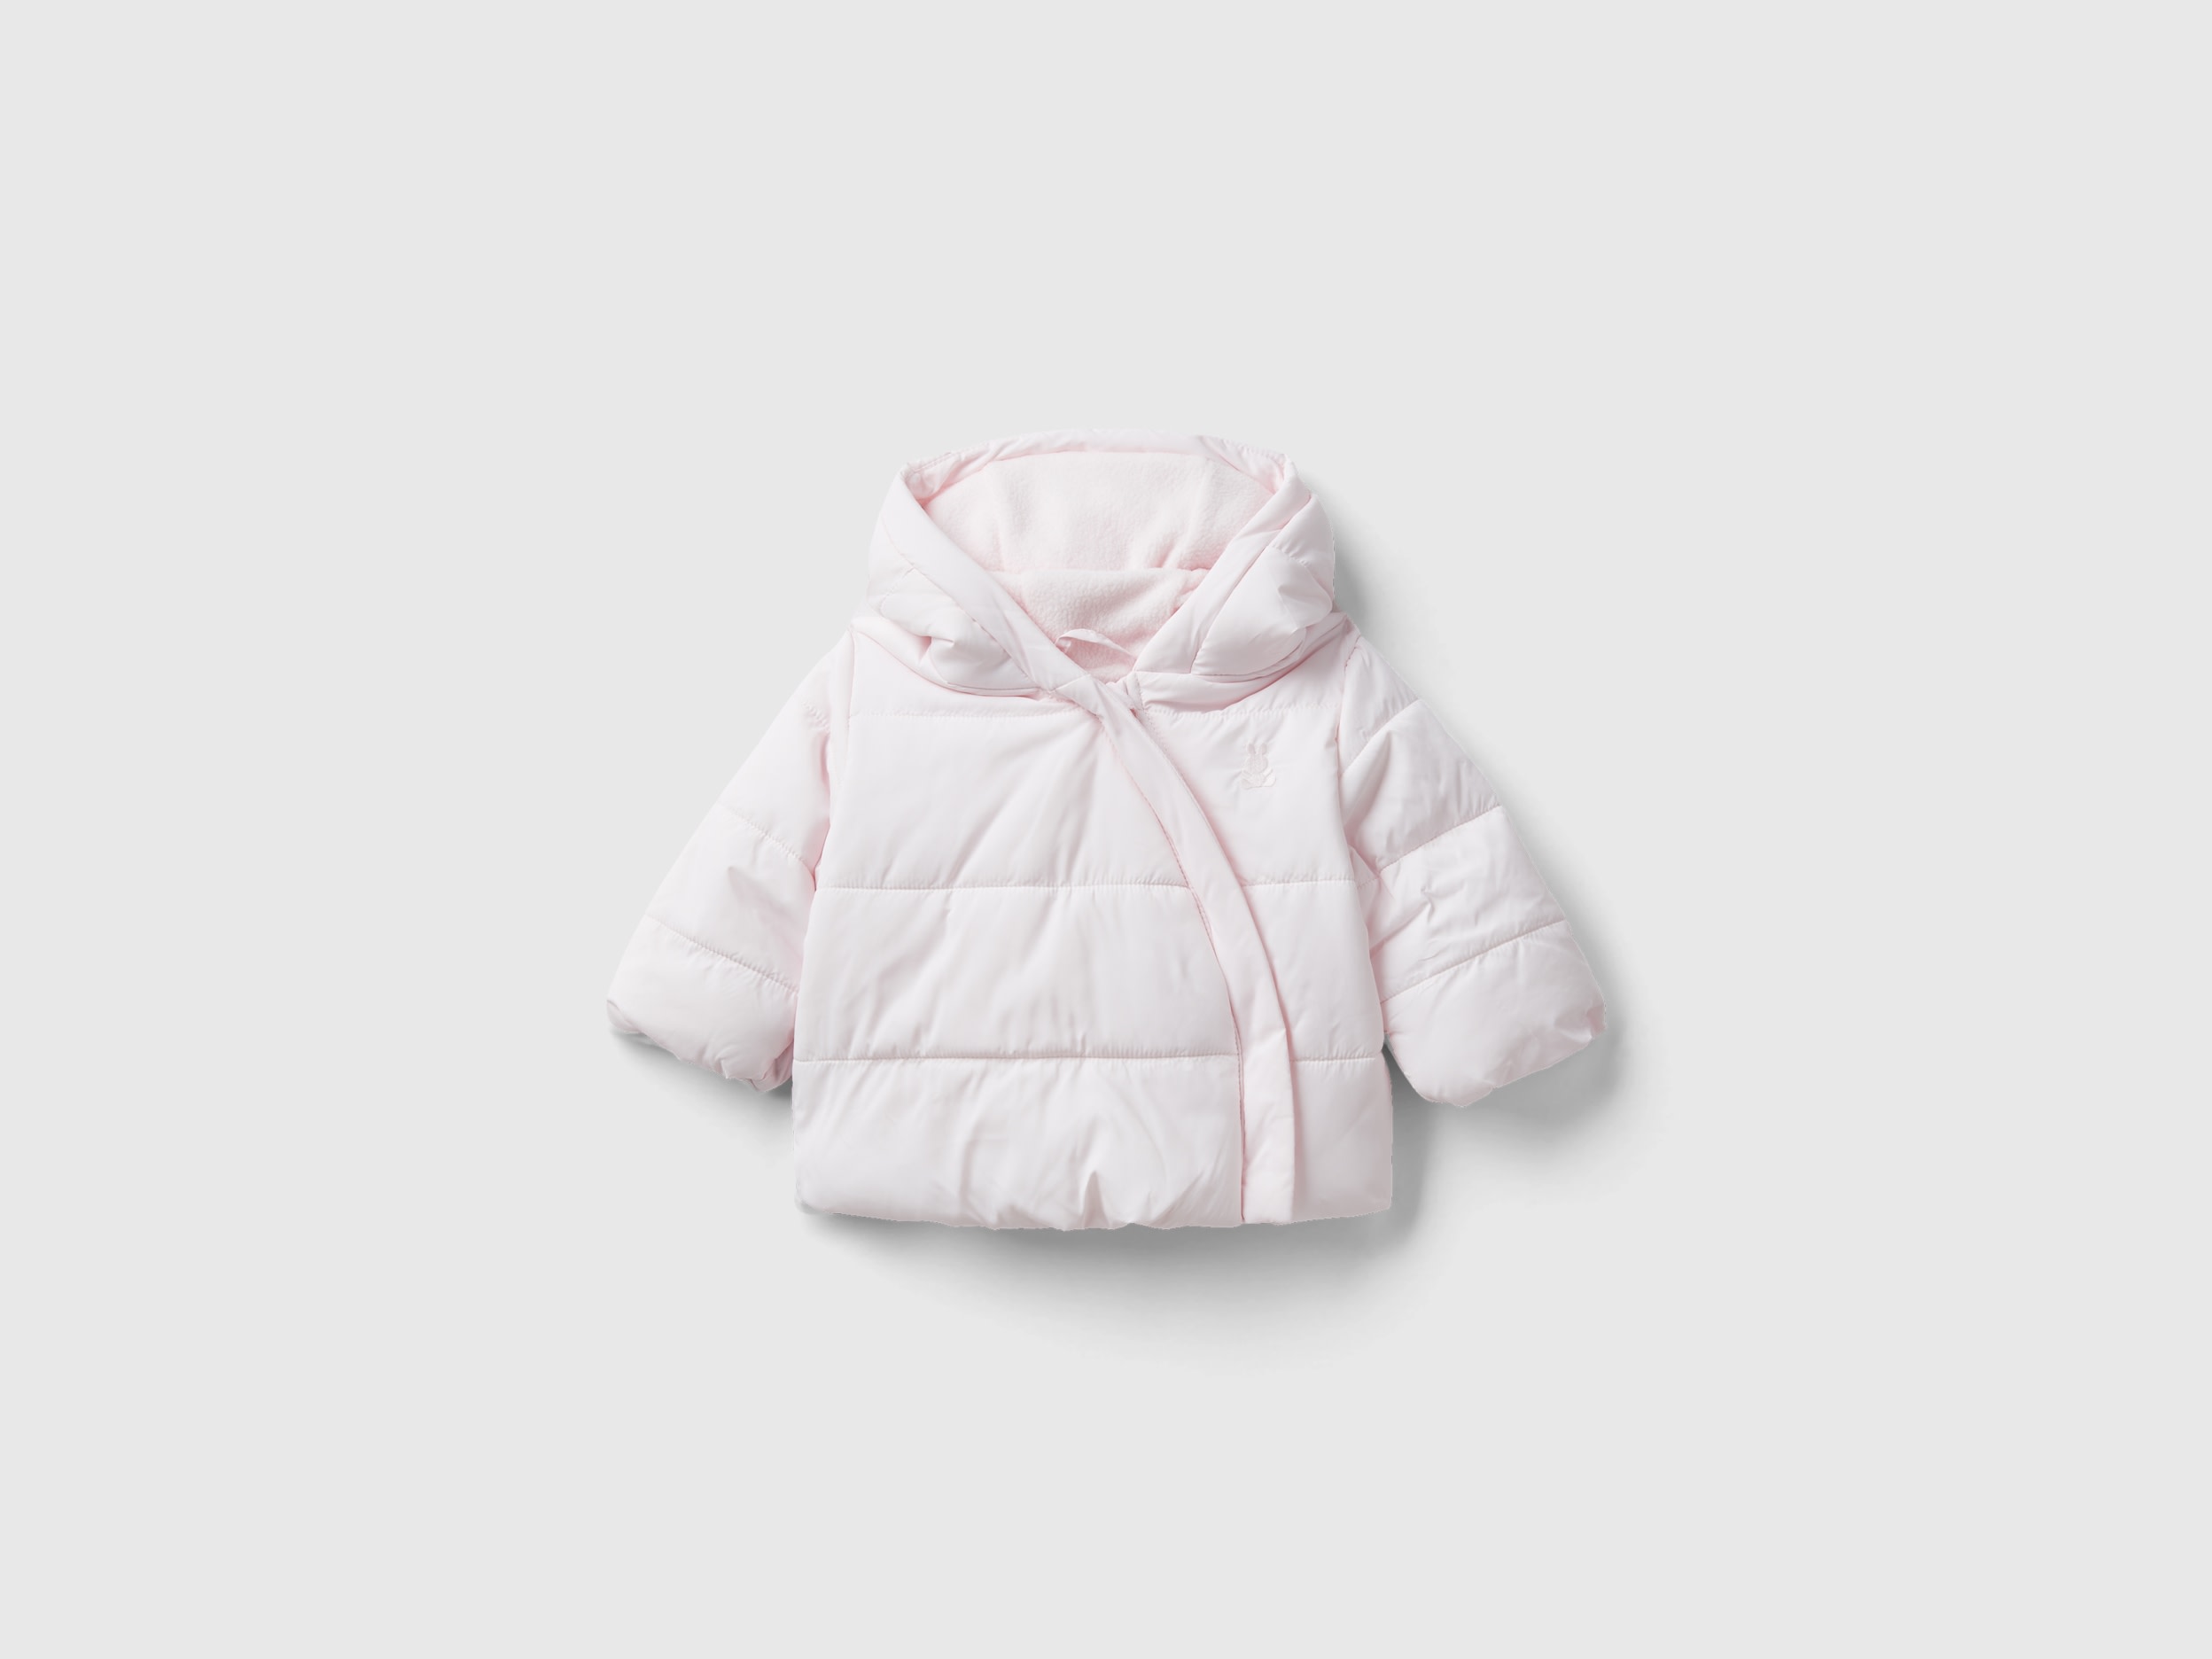 Benetton, Padded Jacket With Hood, size 3-6, Soft Pink, Kids